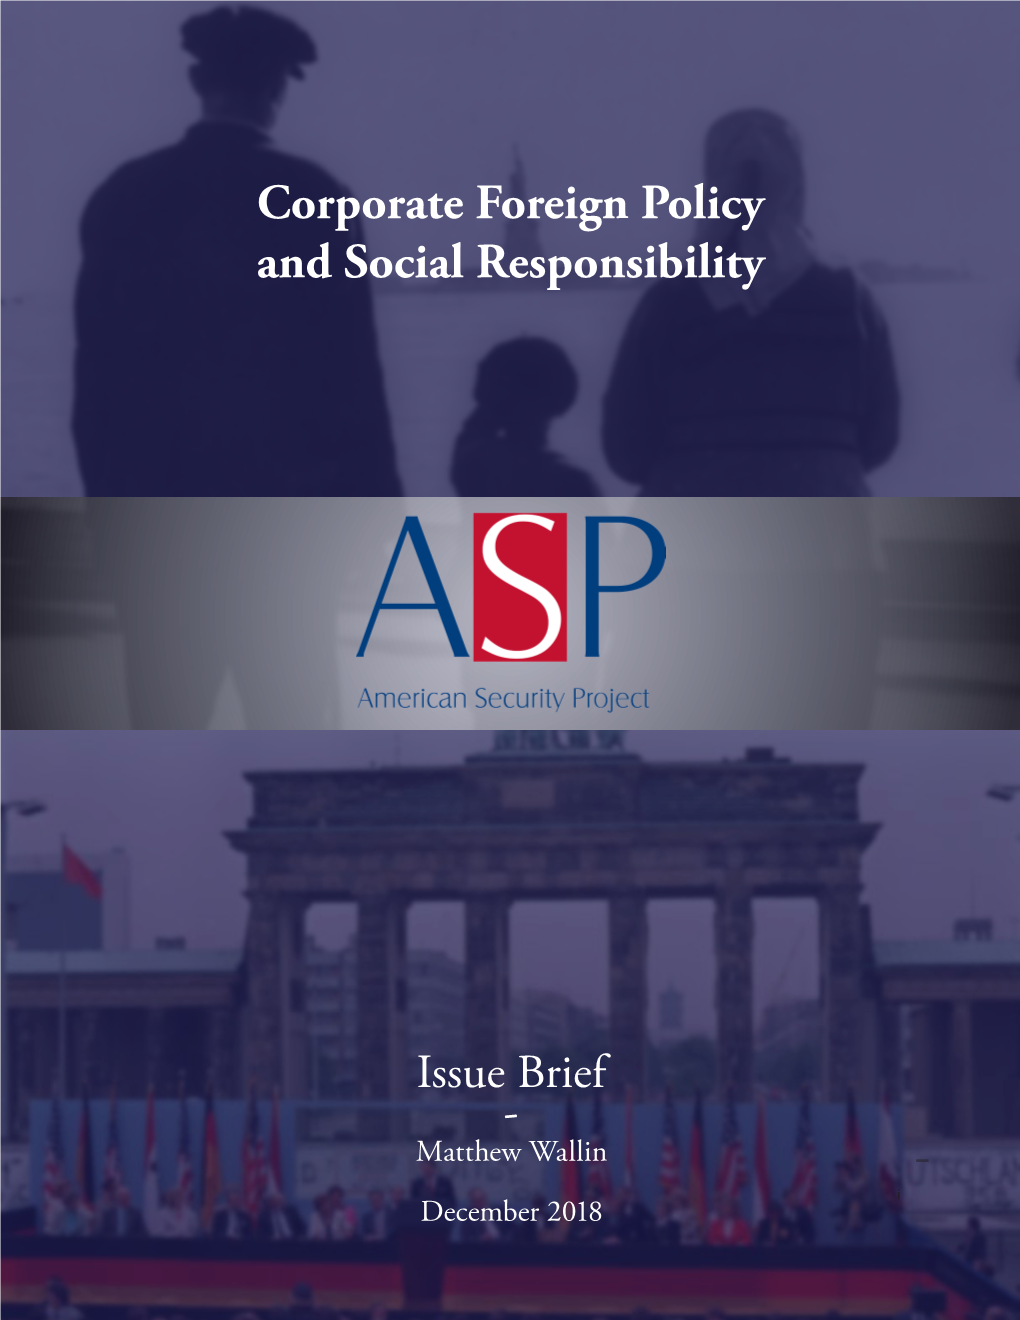 Corporate Foreign Policy and Social Responsibility